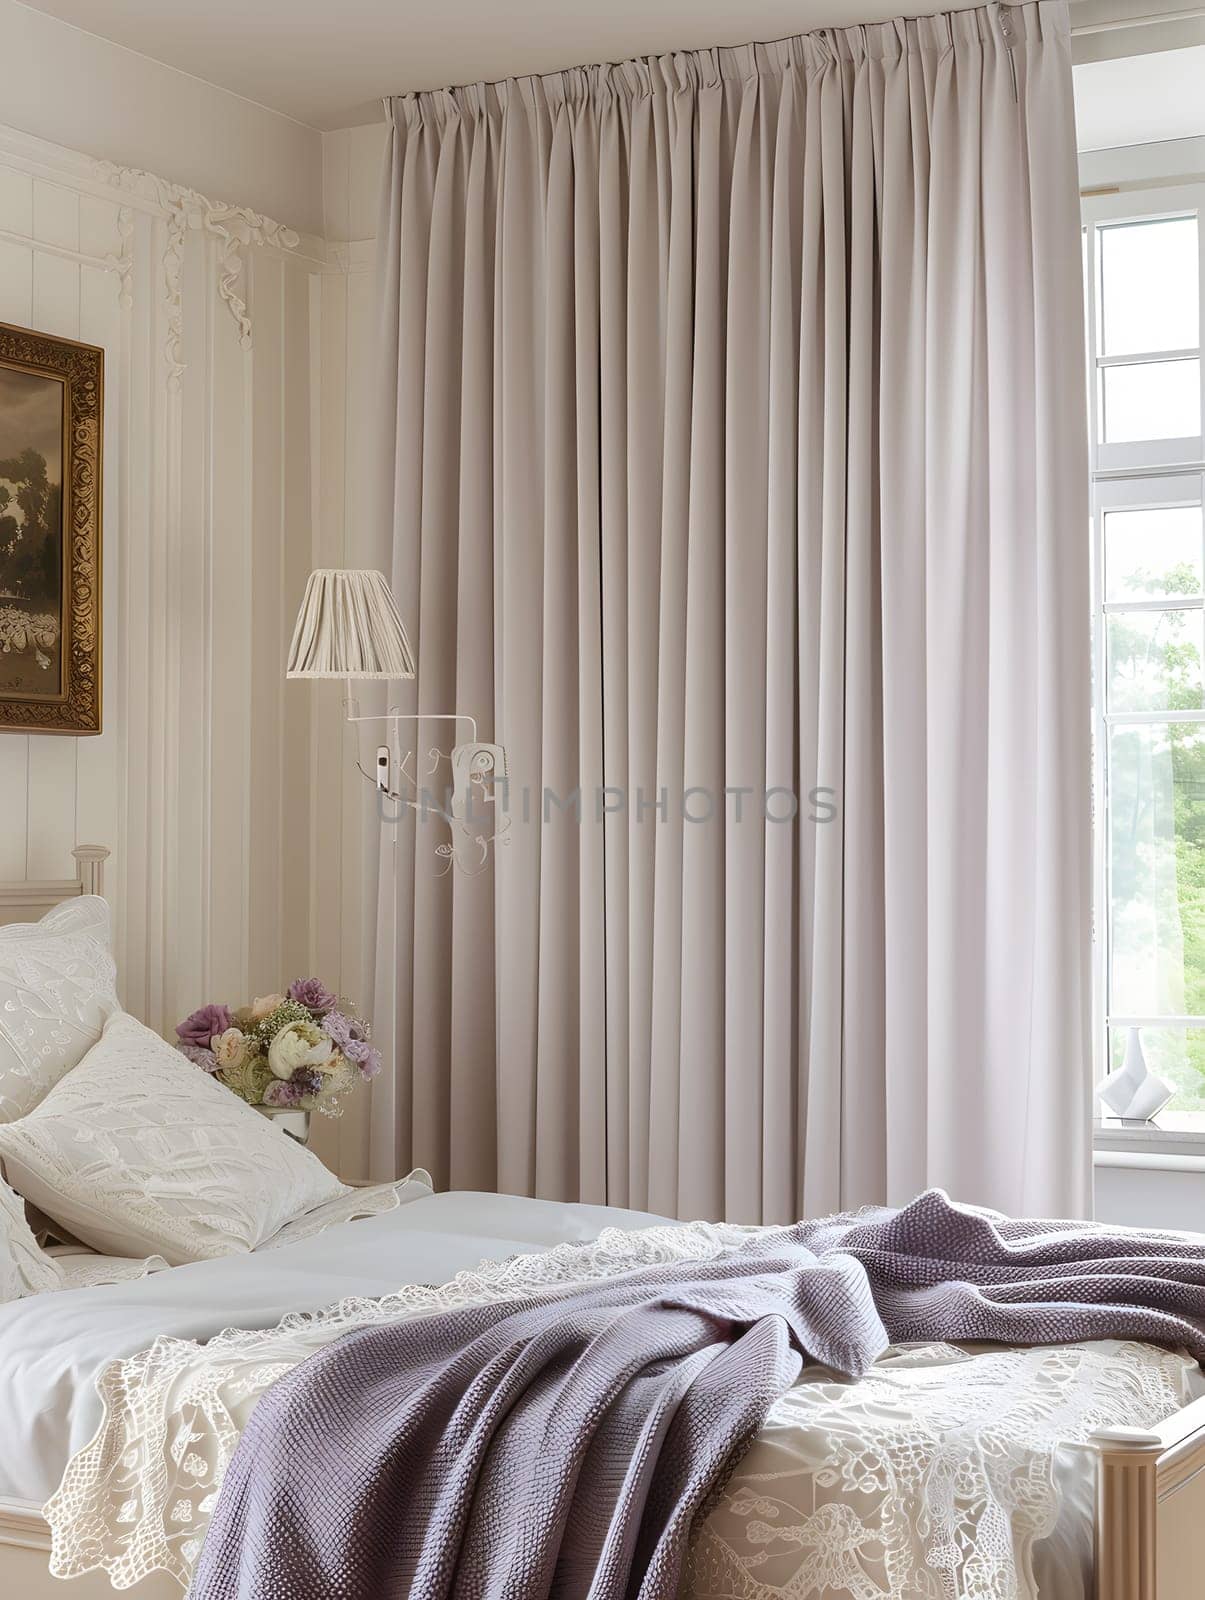 A cozy bedroom with white curtains on the window, a purple blanket on the bed frame made of wood, and a soft flooring for extra comfort